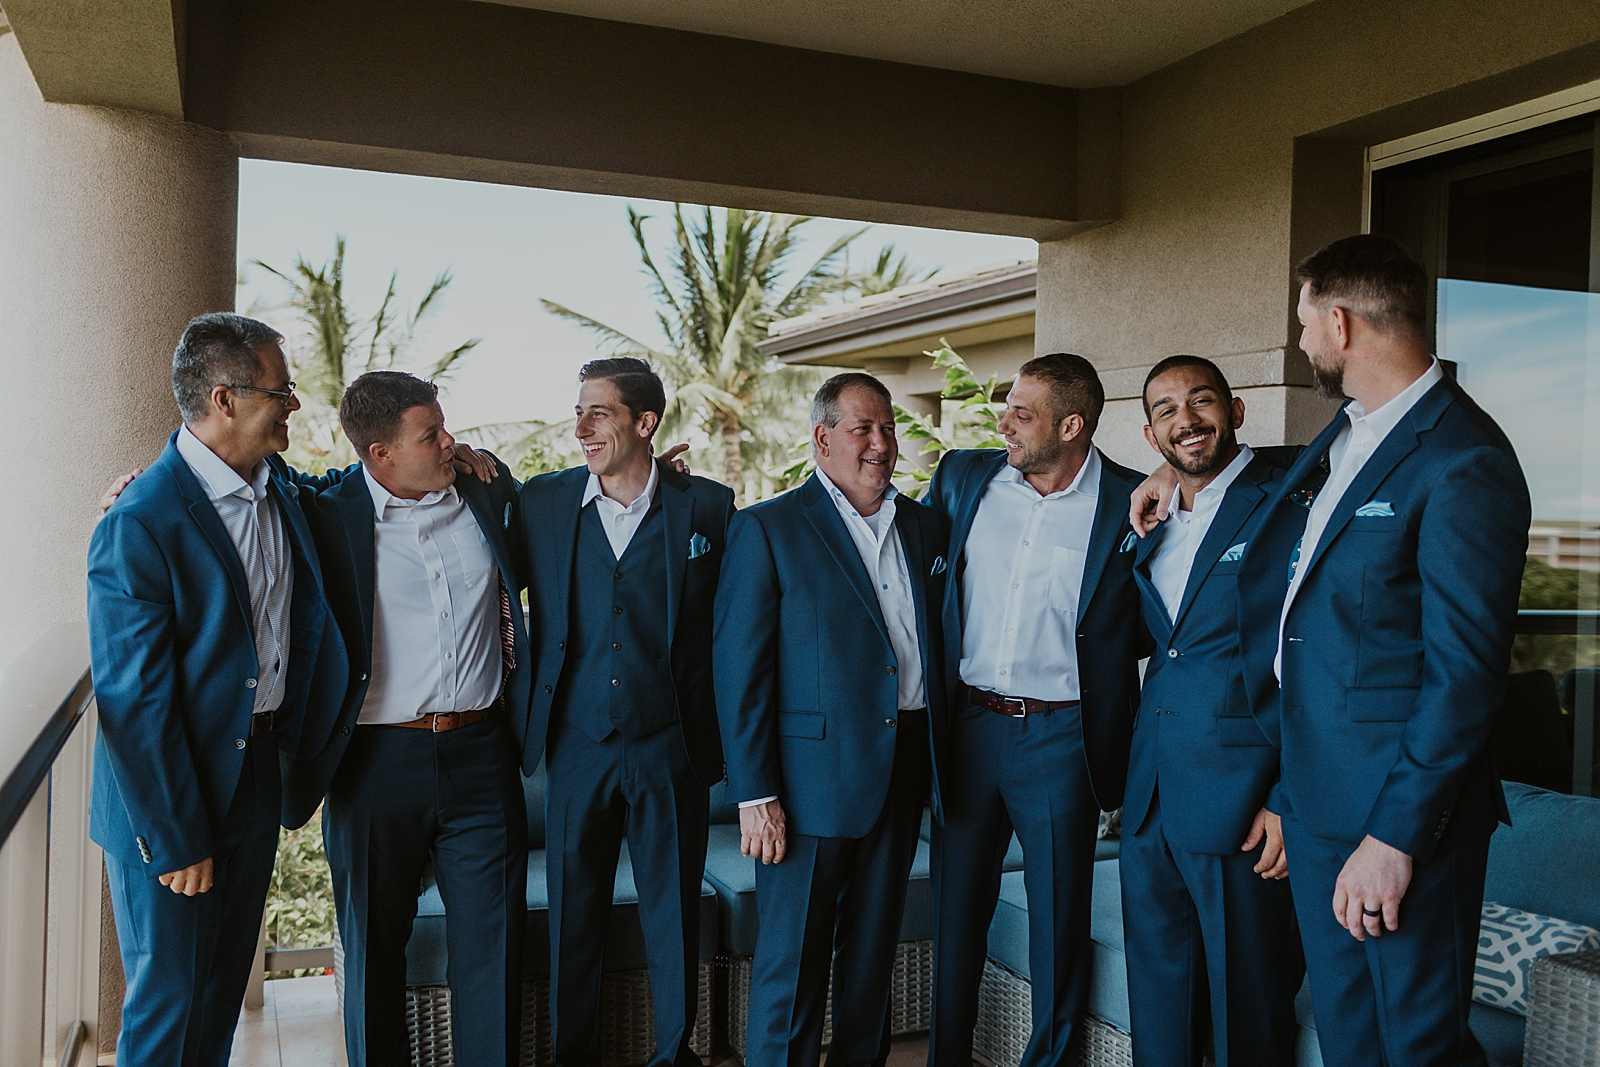 Groom with groomsmen after getting ready arms around each other